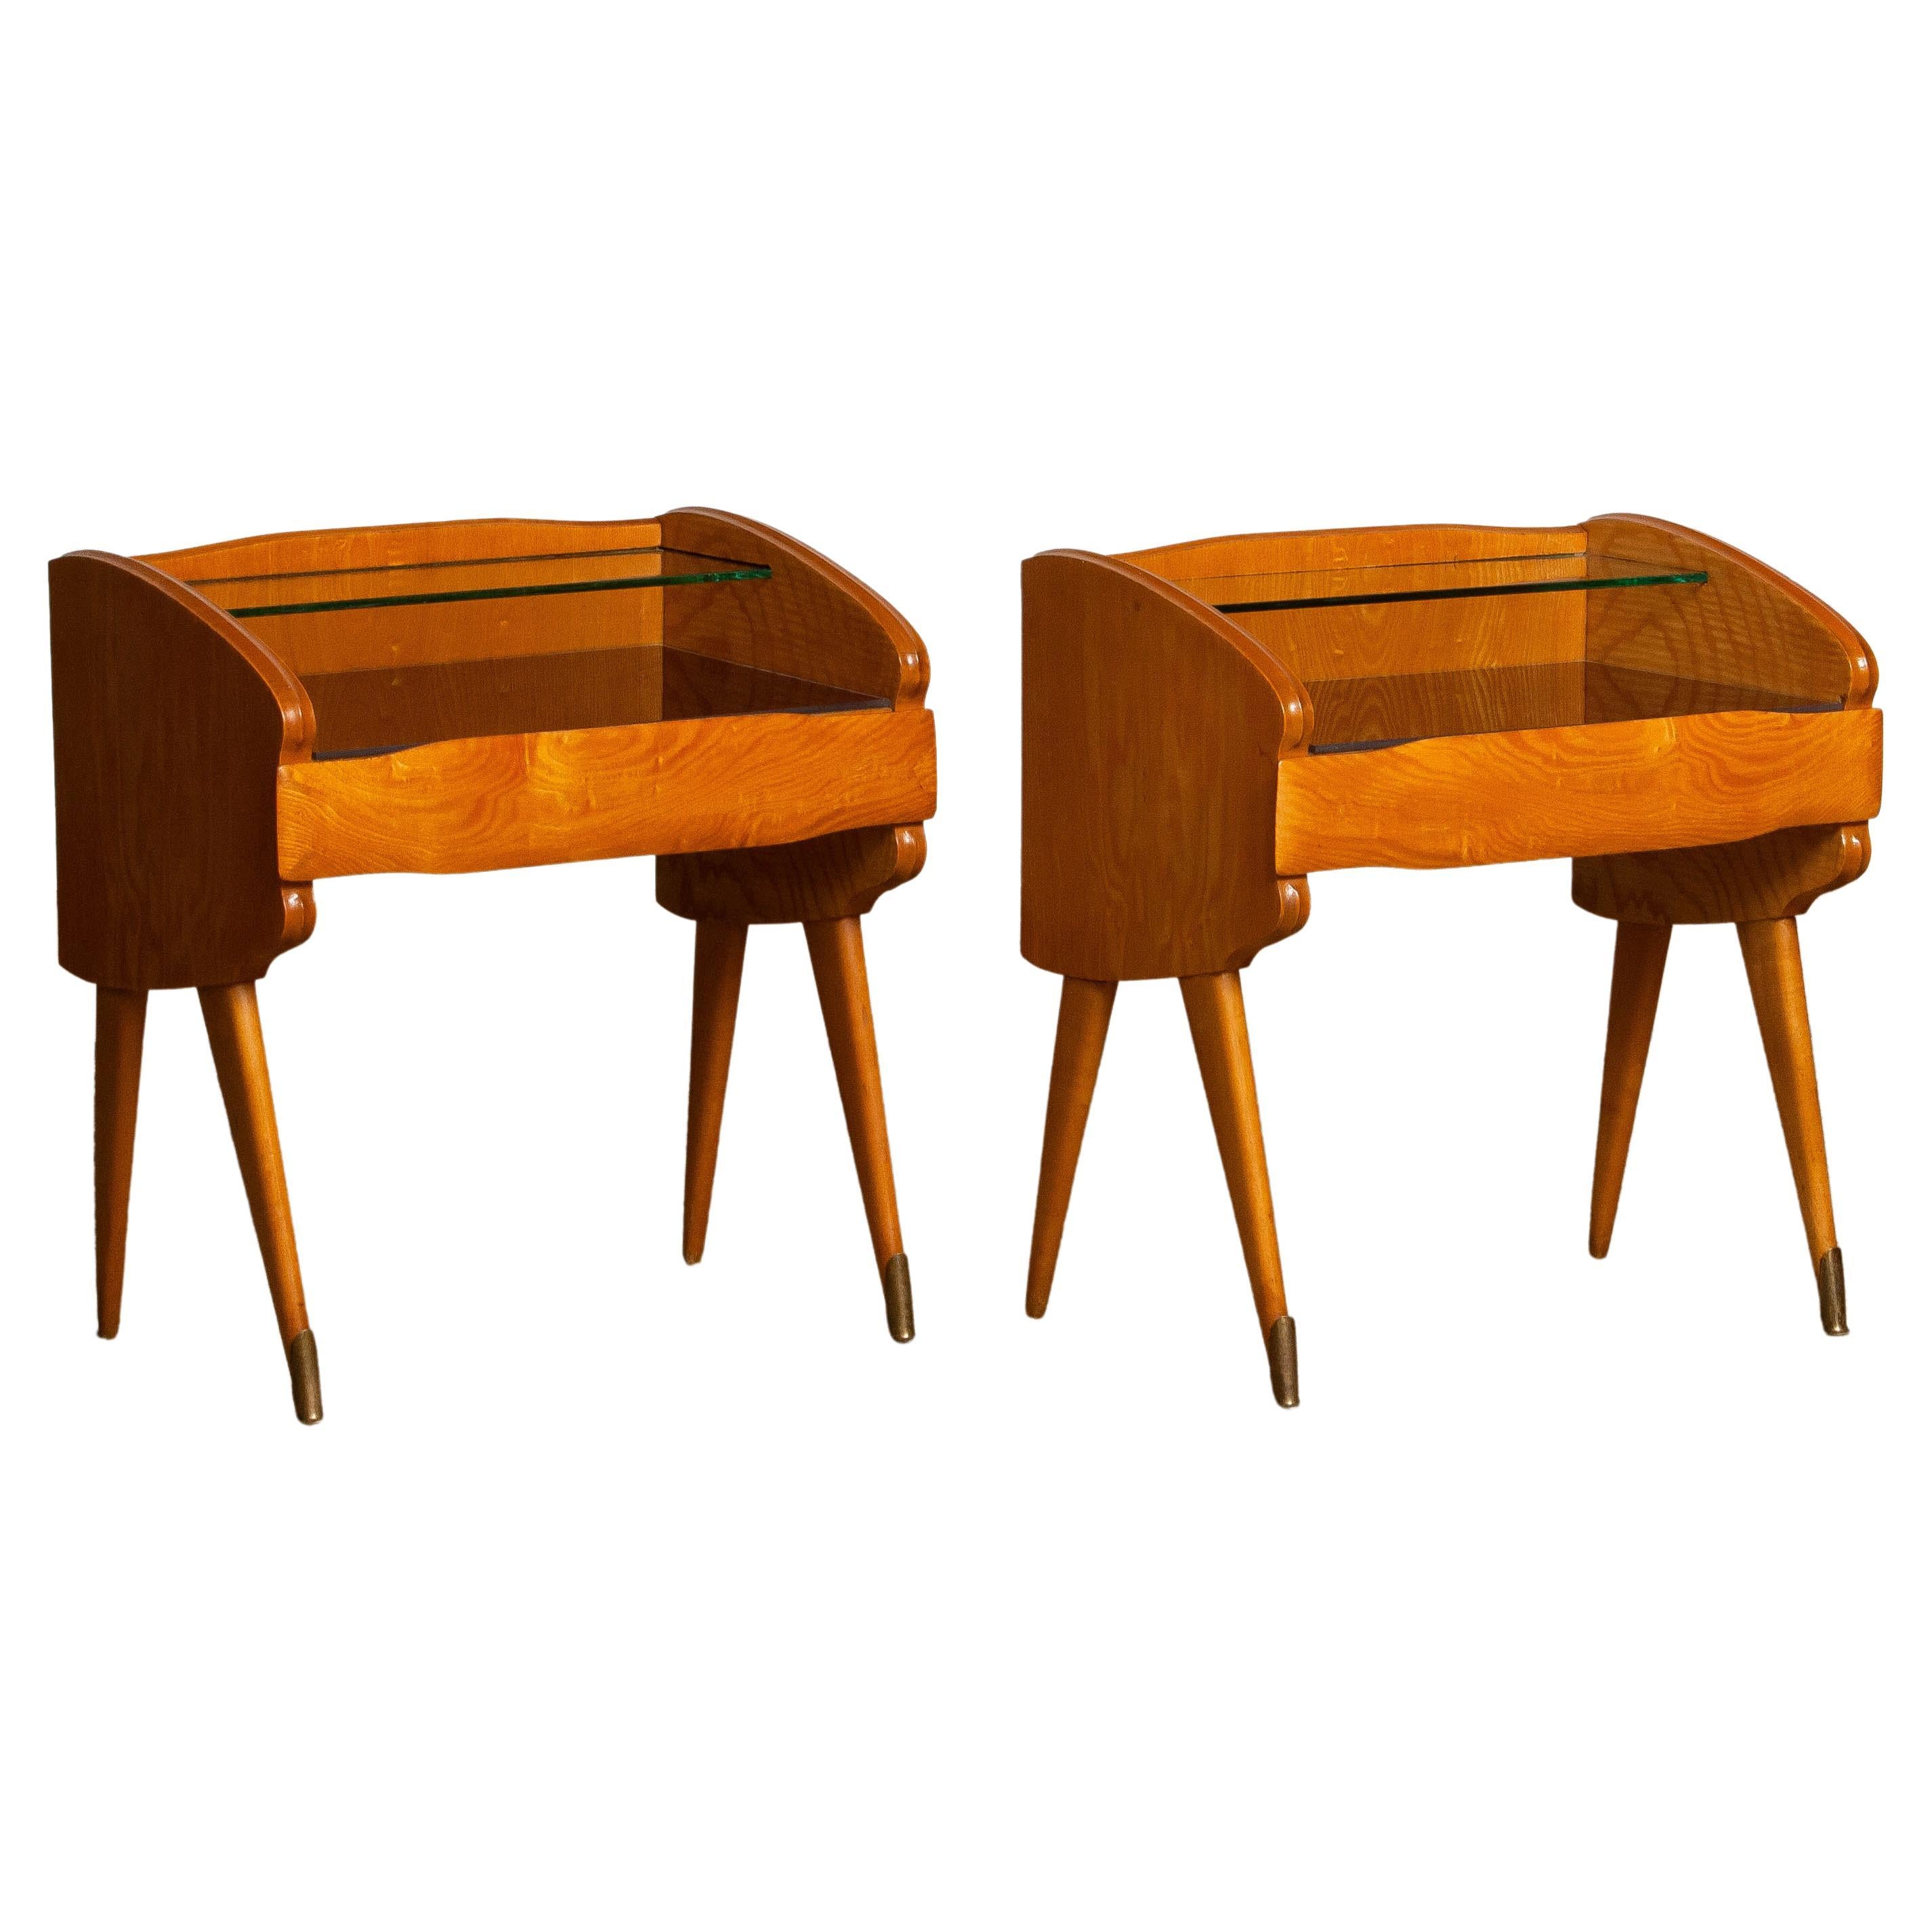 1950's Italian Pair Maple and Glass Bedside Tables / Nightstands by Paolo Buffa